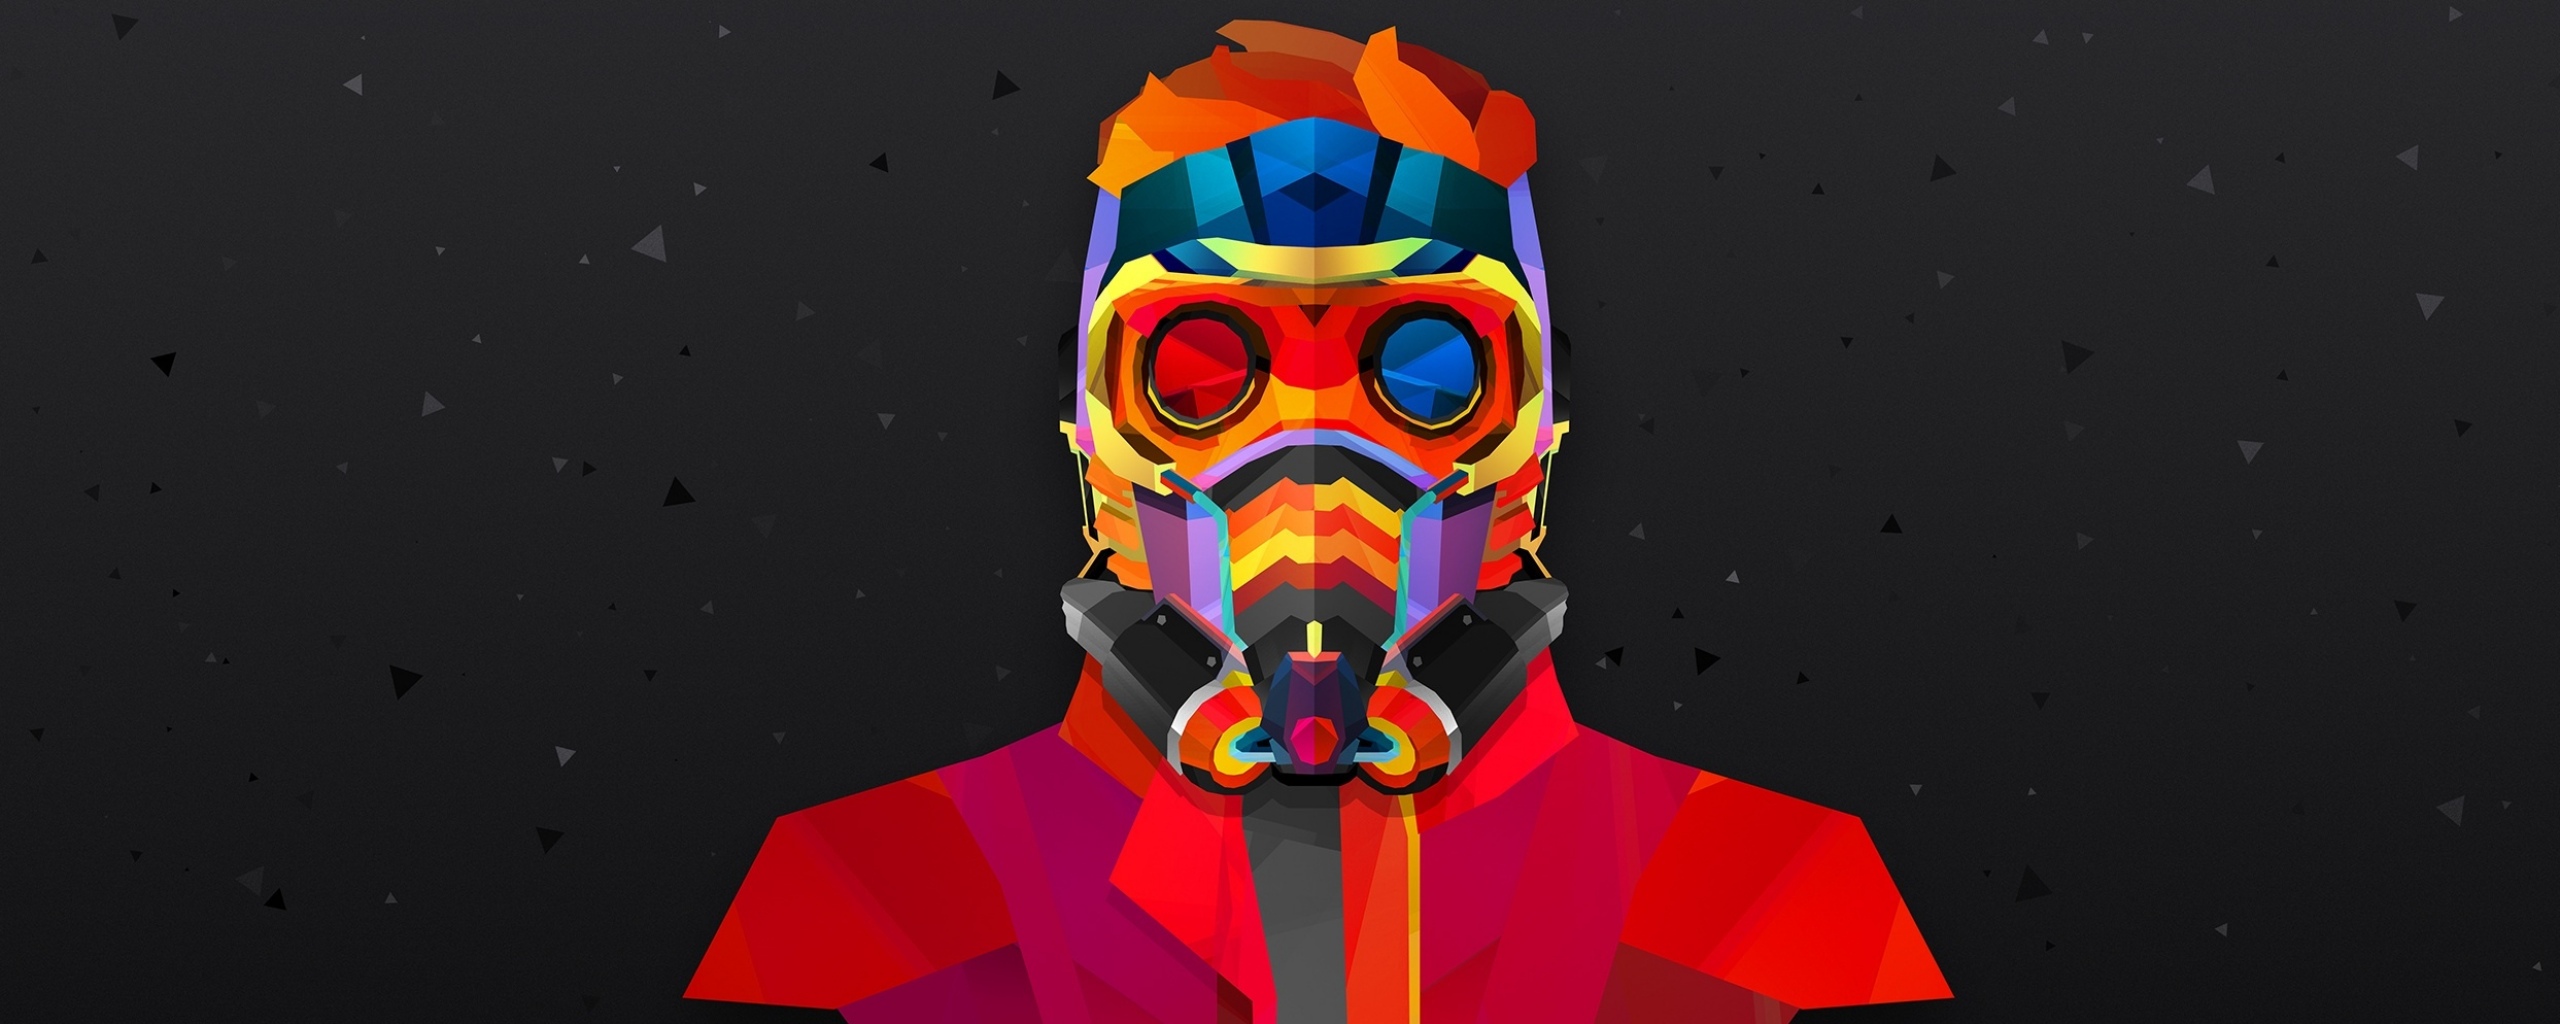 Guardians Of The Galaxy Star Lord Abstract Art Desktop